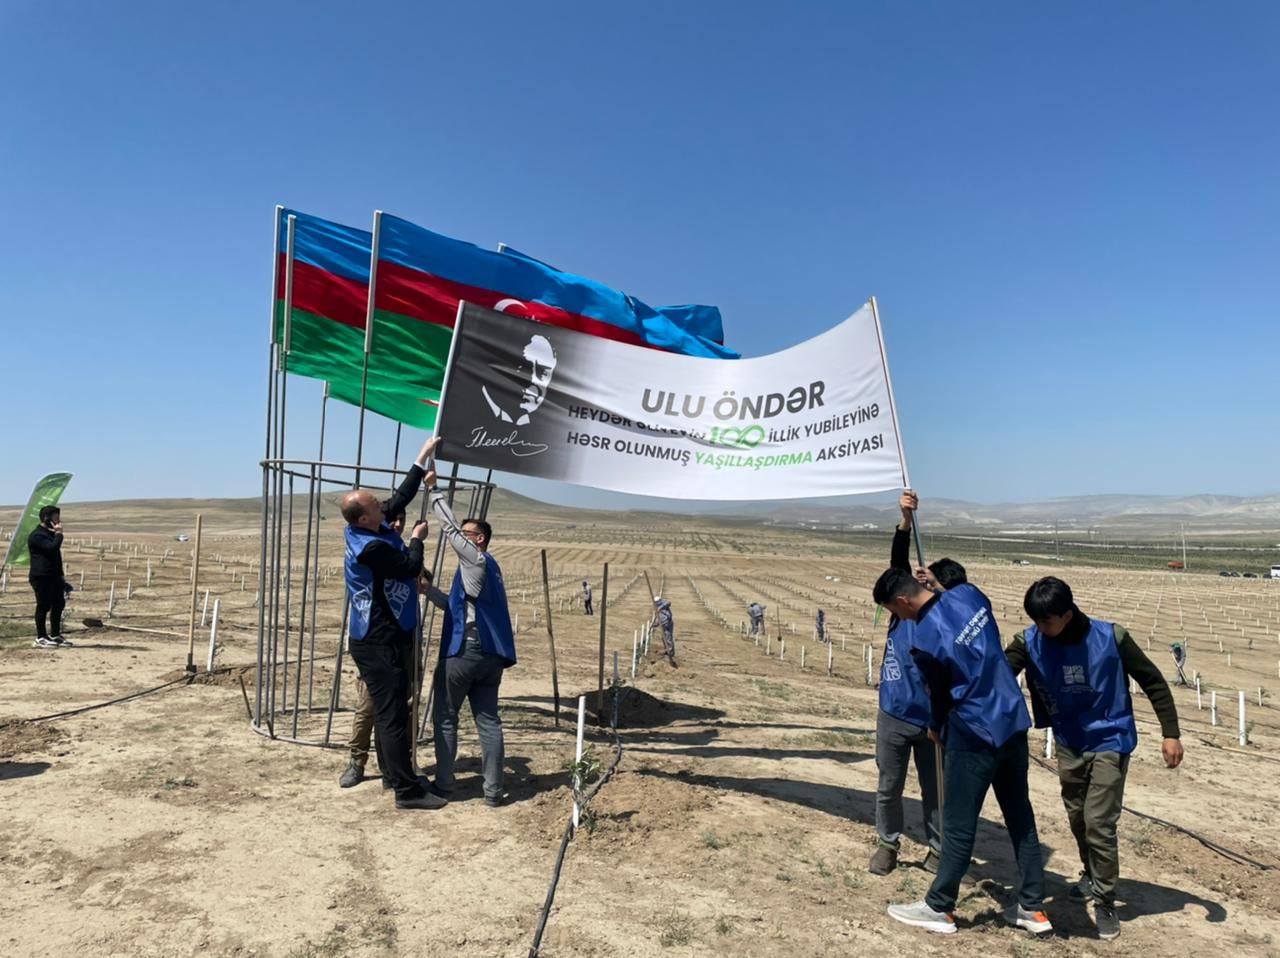 Tree-planting campaign timed to 100th anniversary of National Leader held in Mushvigabad [PHOTOS]